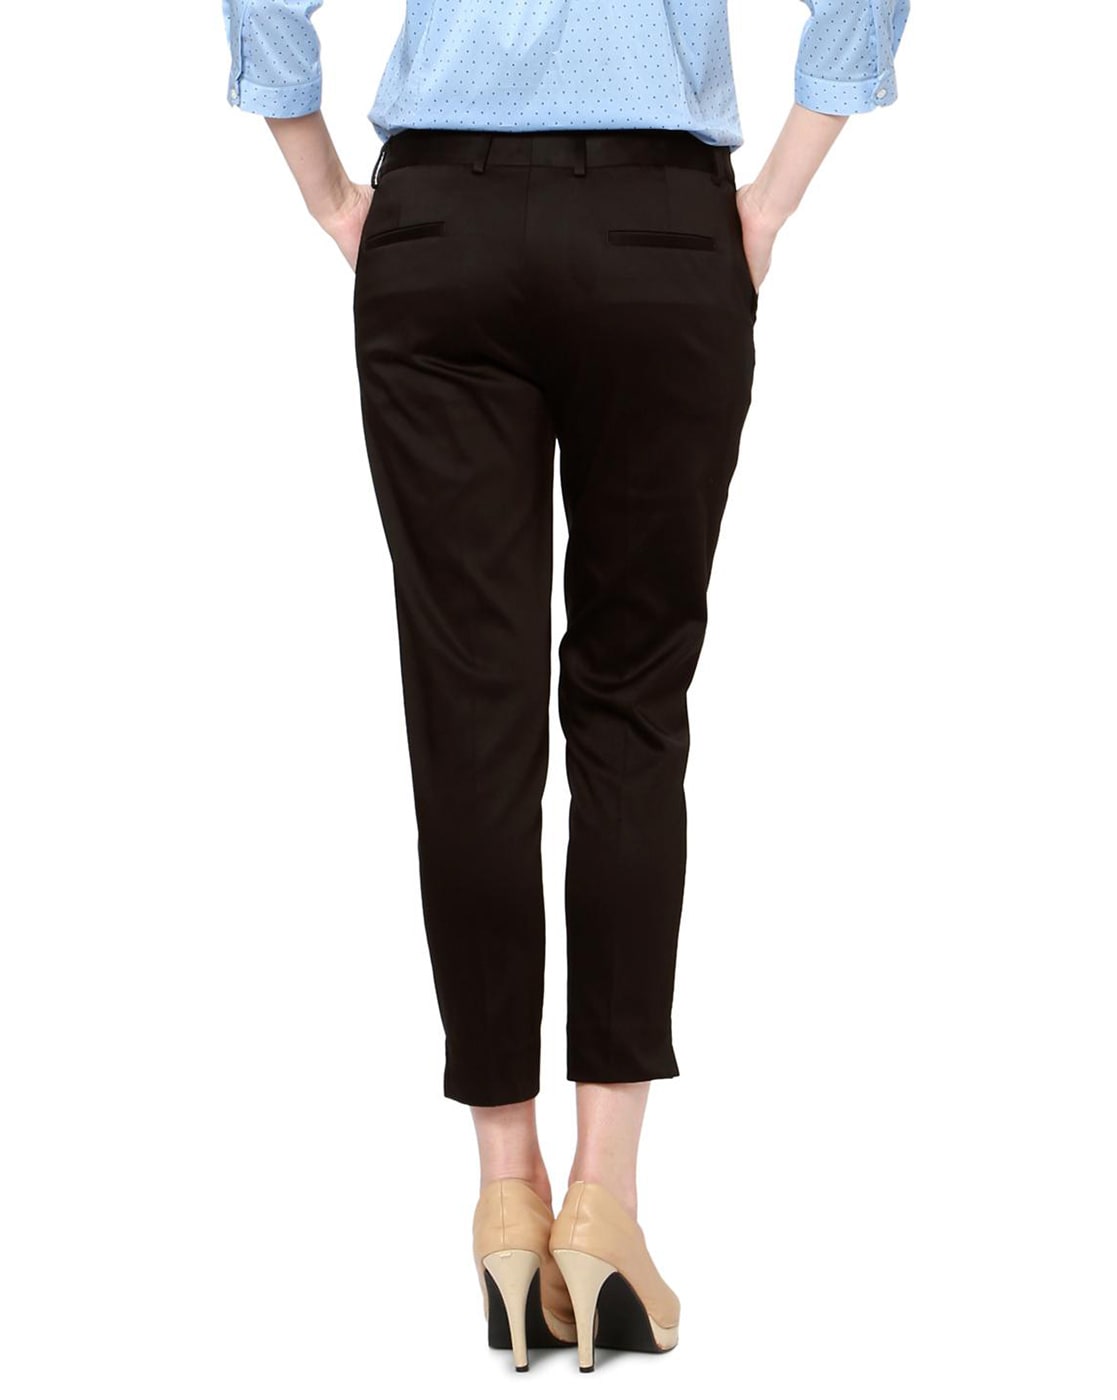 Buy Women Black Regular Fit Solid Business Casual Trousers Online  235858   Allen Solly